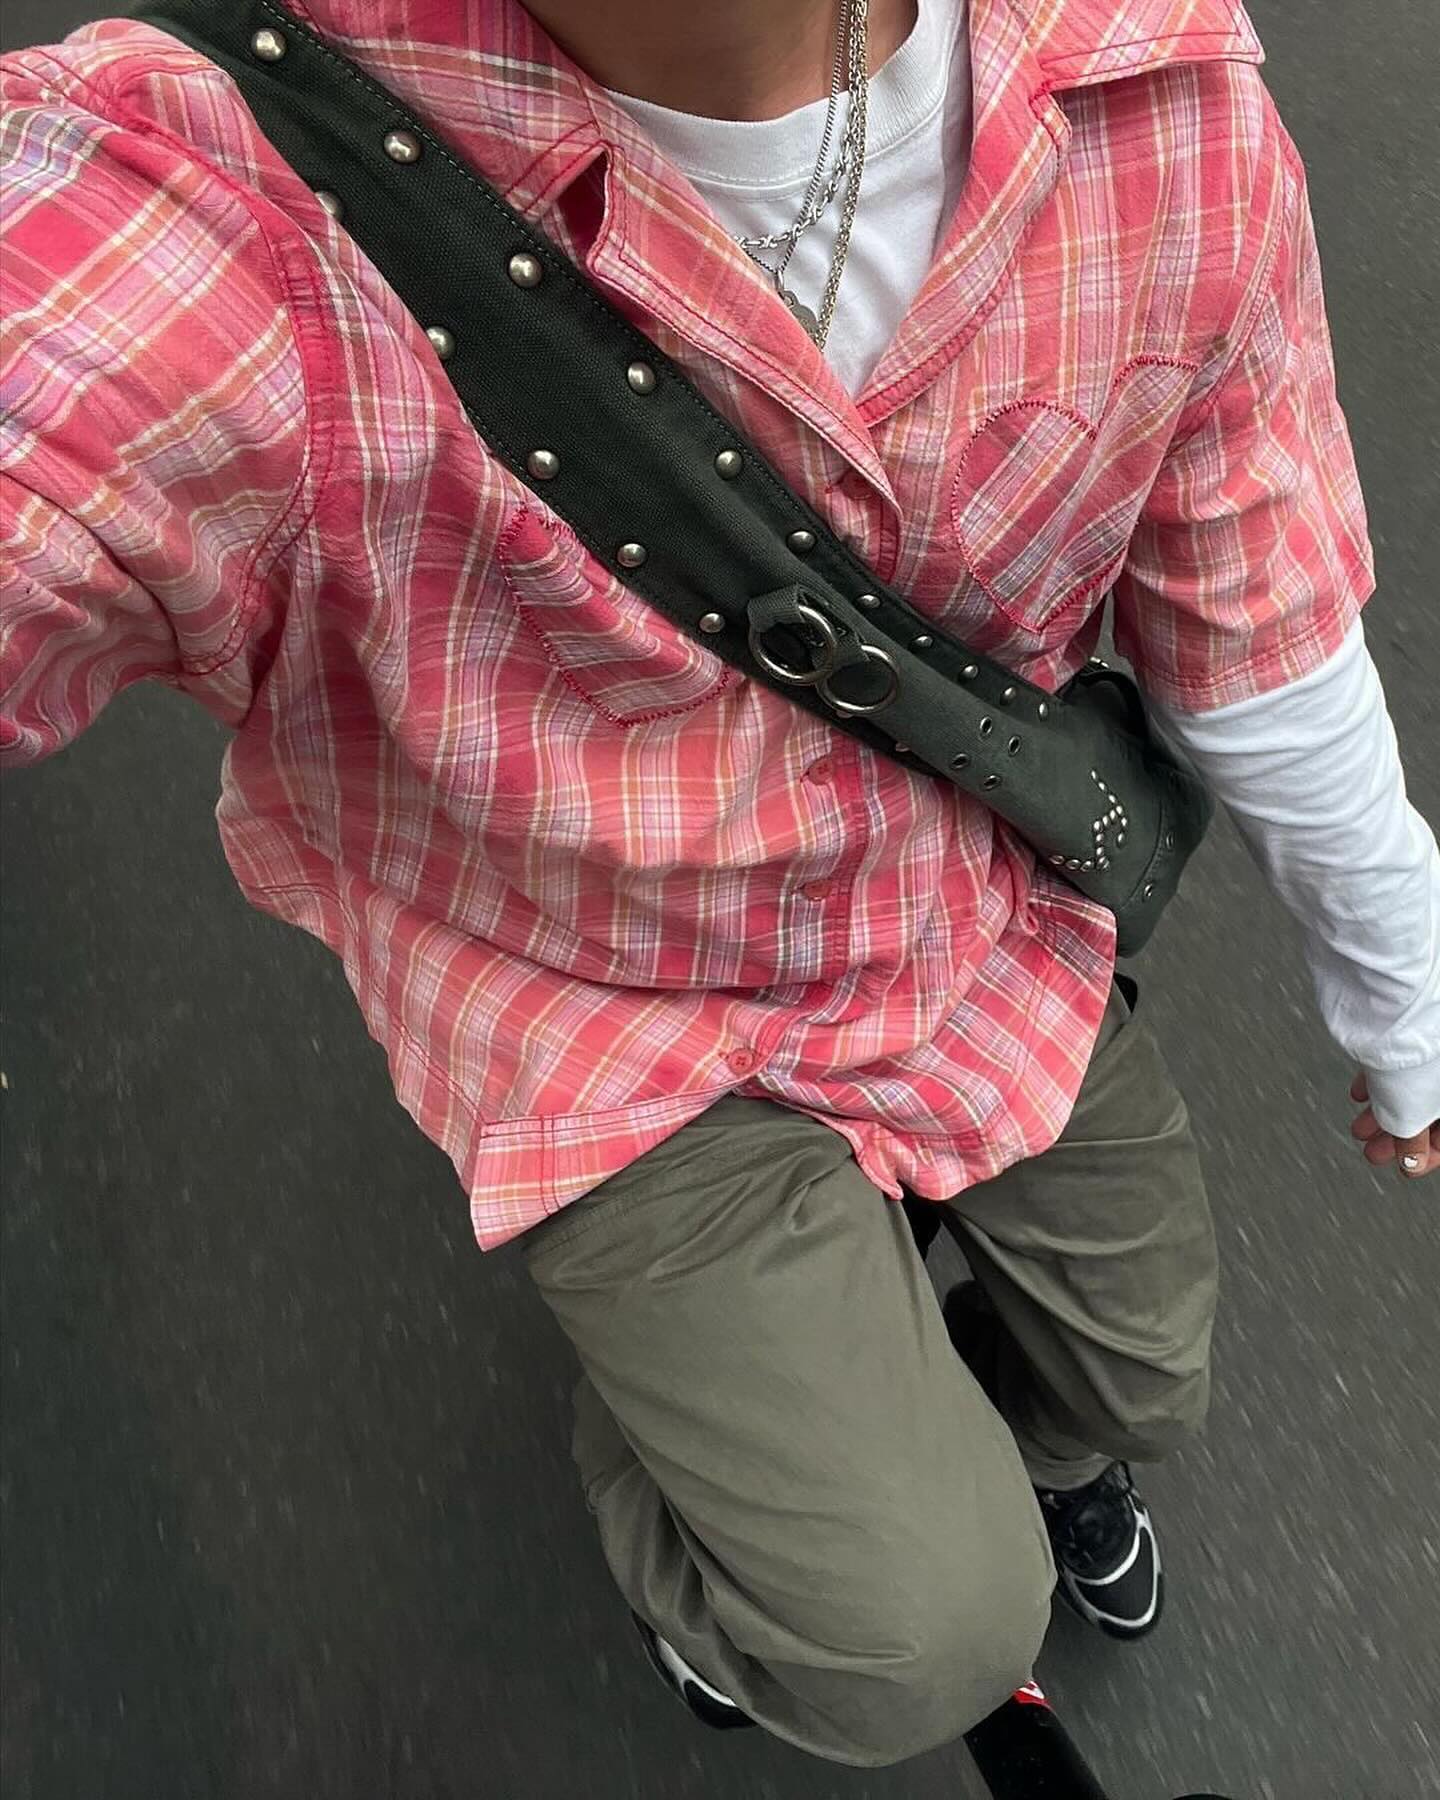 duct-on-june-26-2024-tagging-arthurrgrd-may-be-an-image-of-1-person-scooter-segway-skateboard-and-flannel-17206759796081070593142-1720888611575-1720888612341639180897.jpg